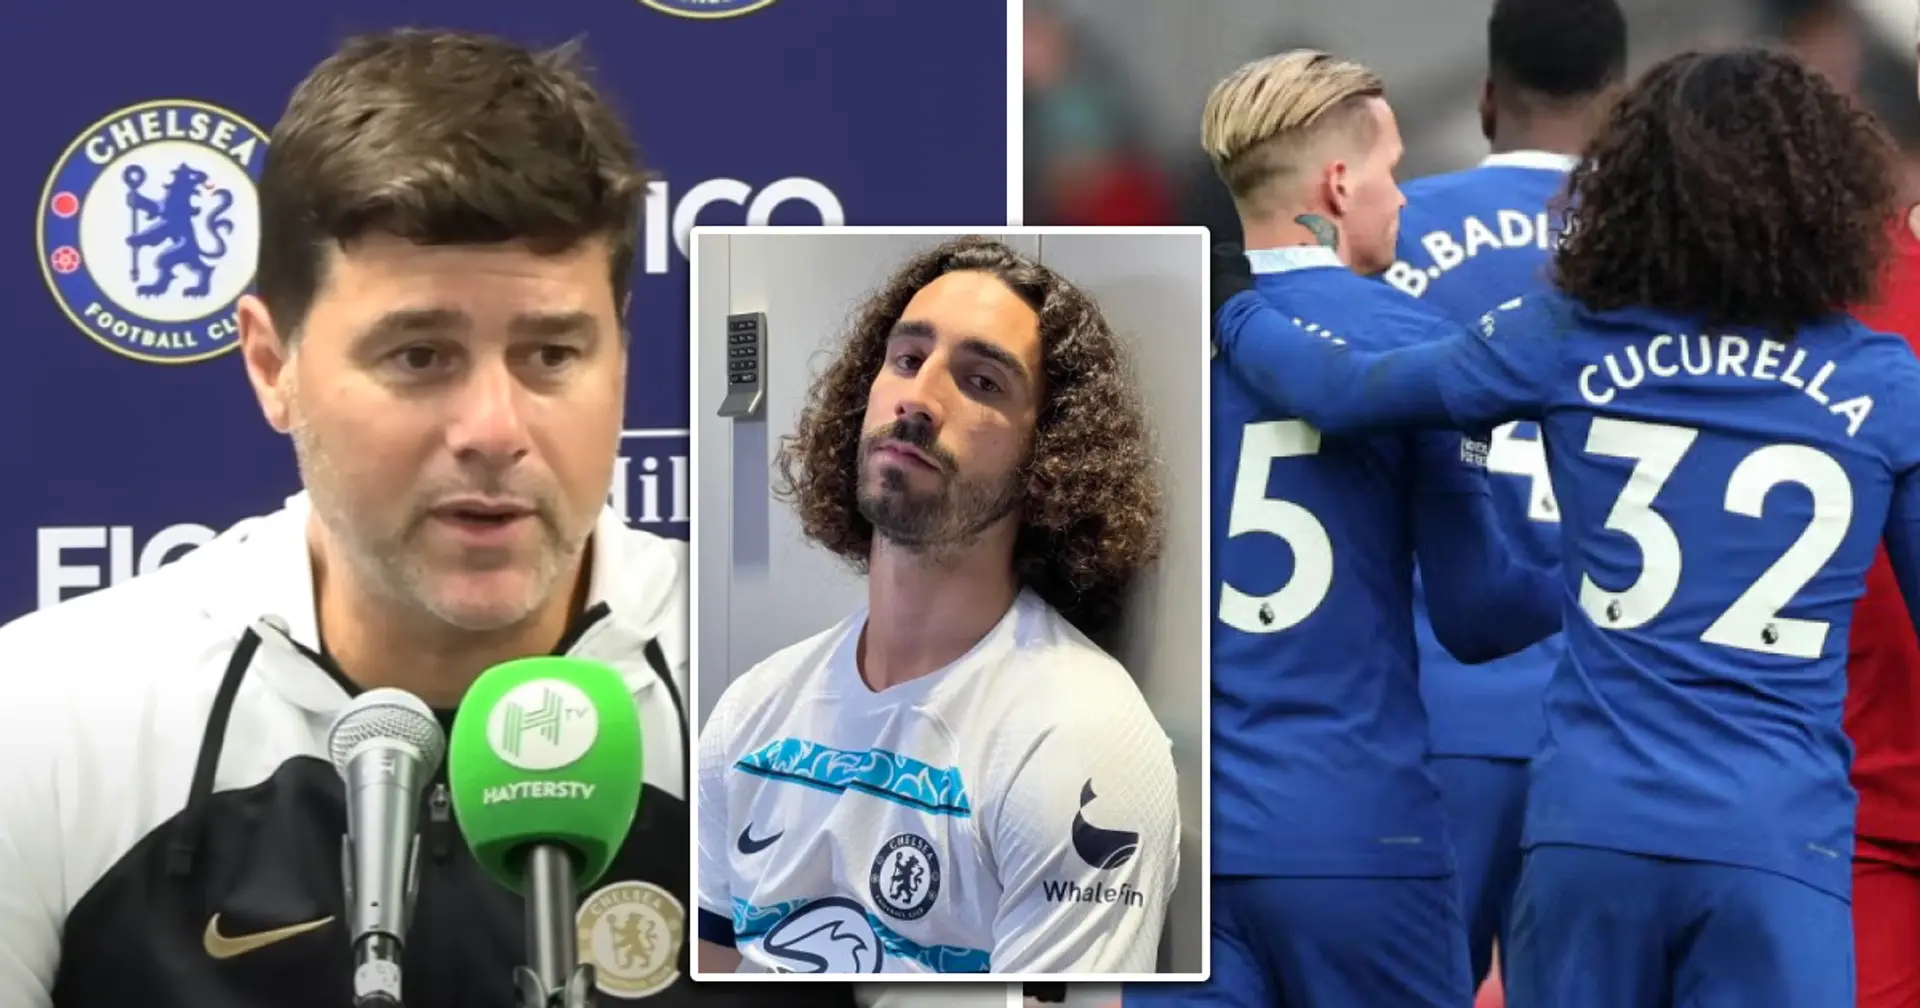 2 Chelsea players who will benefit from Cucurella's exit 